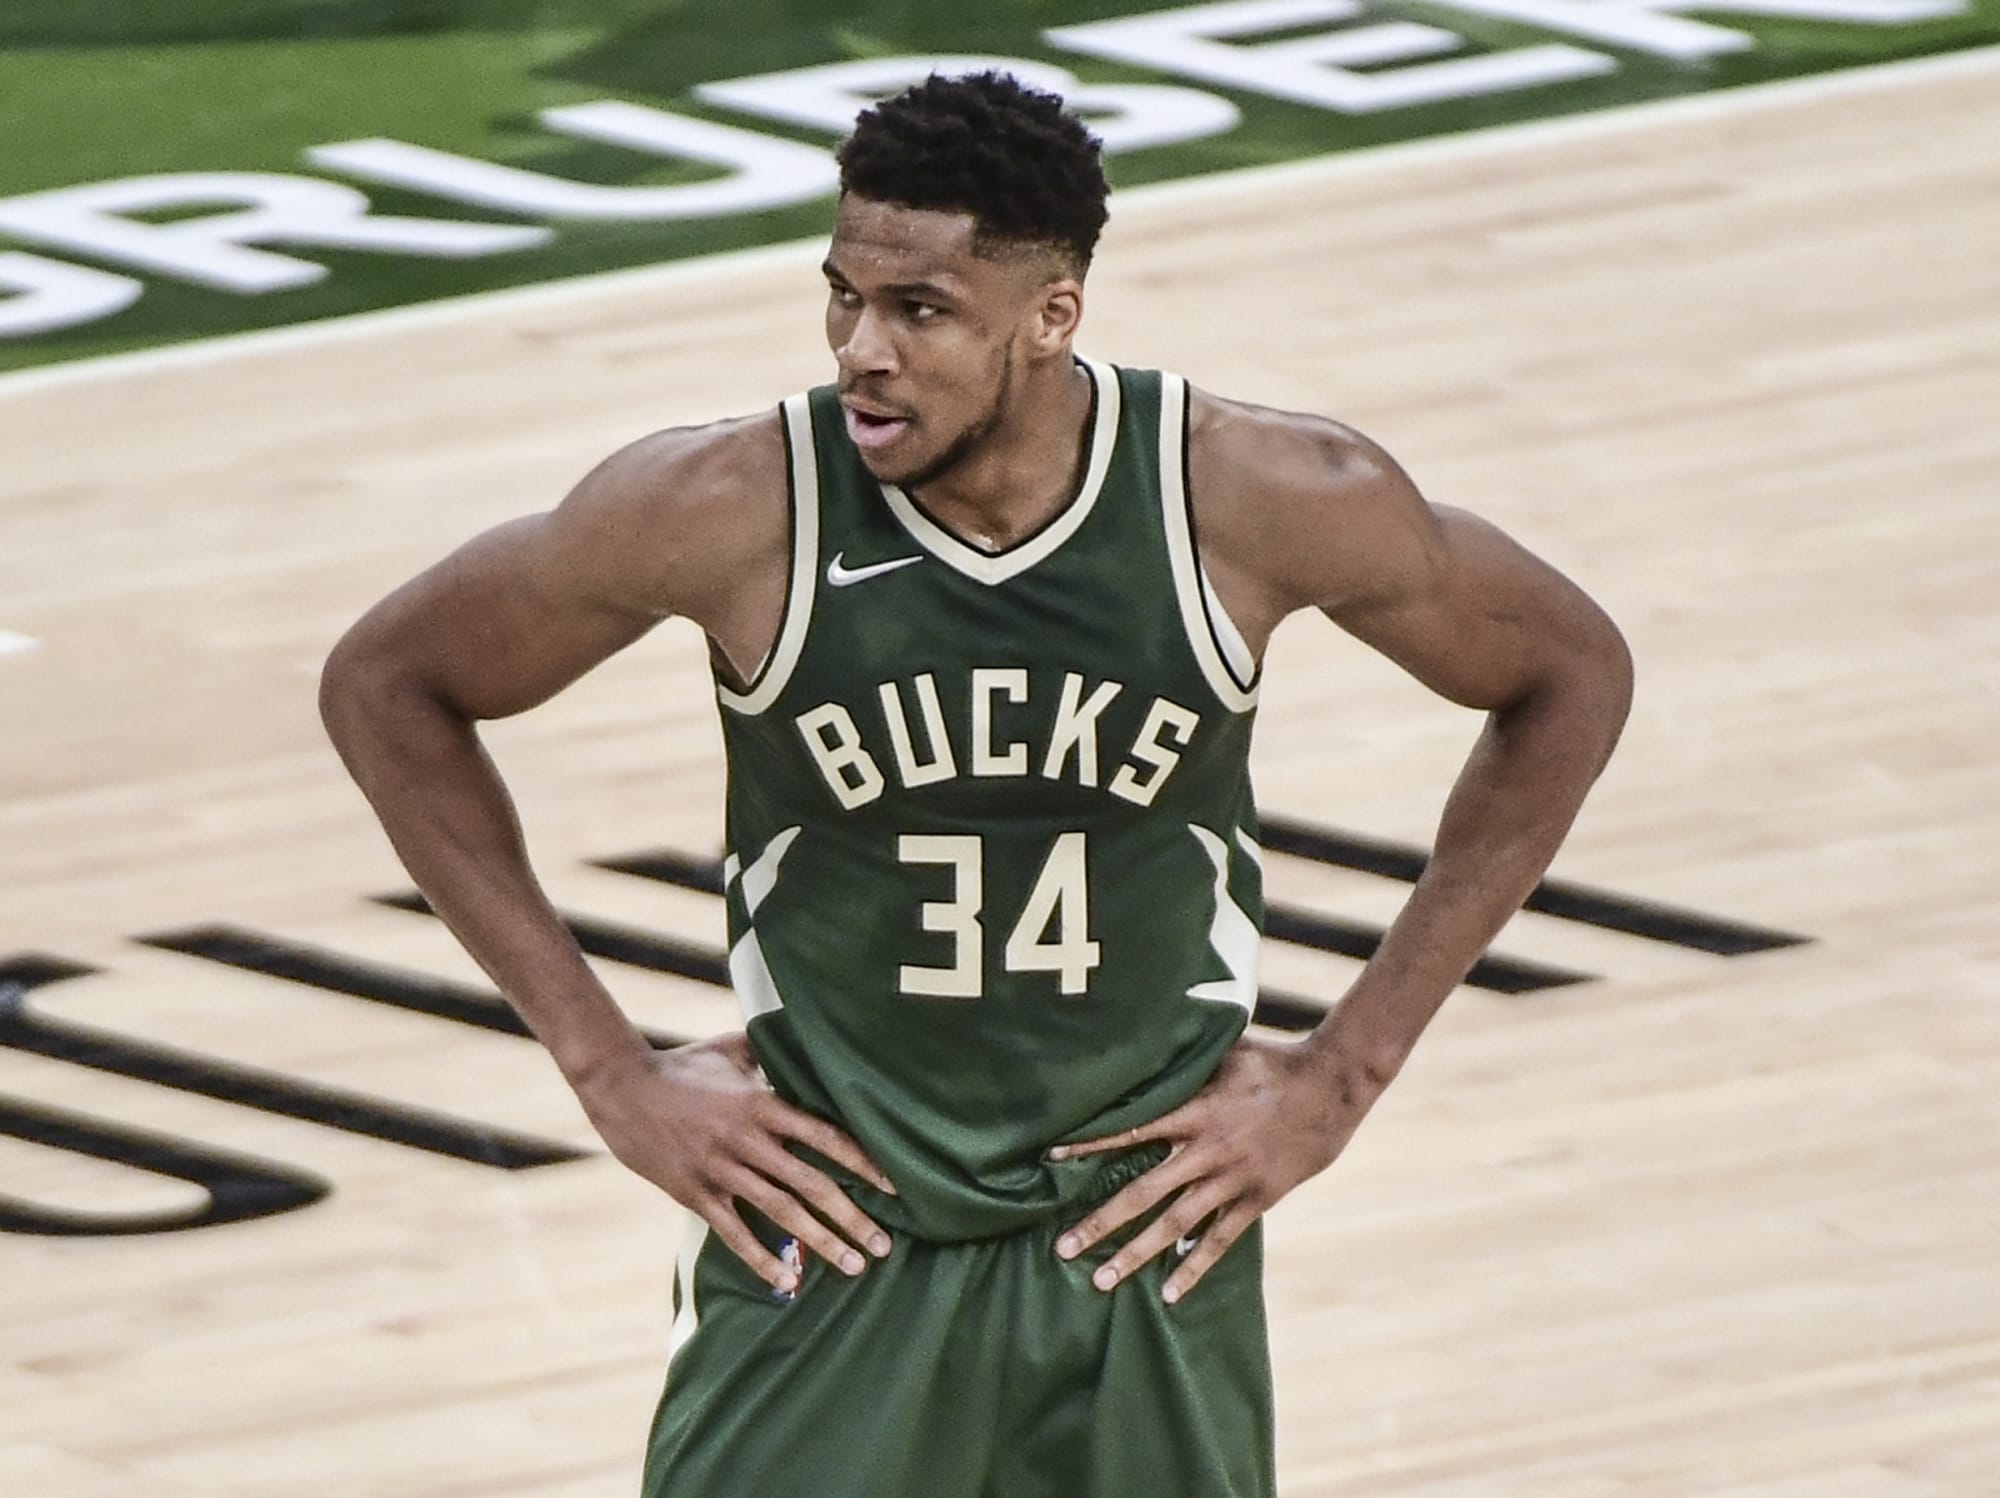 Rise,” A New Film From Disney Based On The Triumphant Real Life Story About  The Remarkable Family Behind NBA Champs Giannis, Thanasis And Kostas  Antetokounmpo, And Their Younger Brother Alex, To Premiere